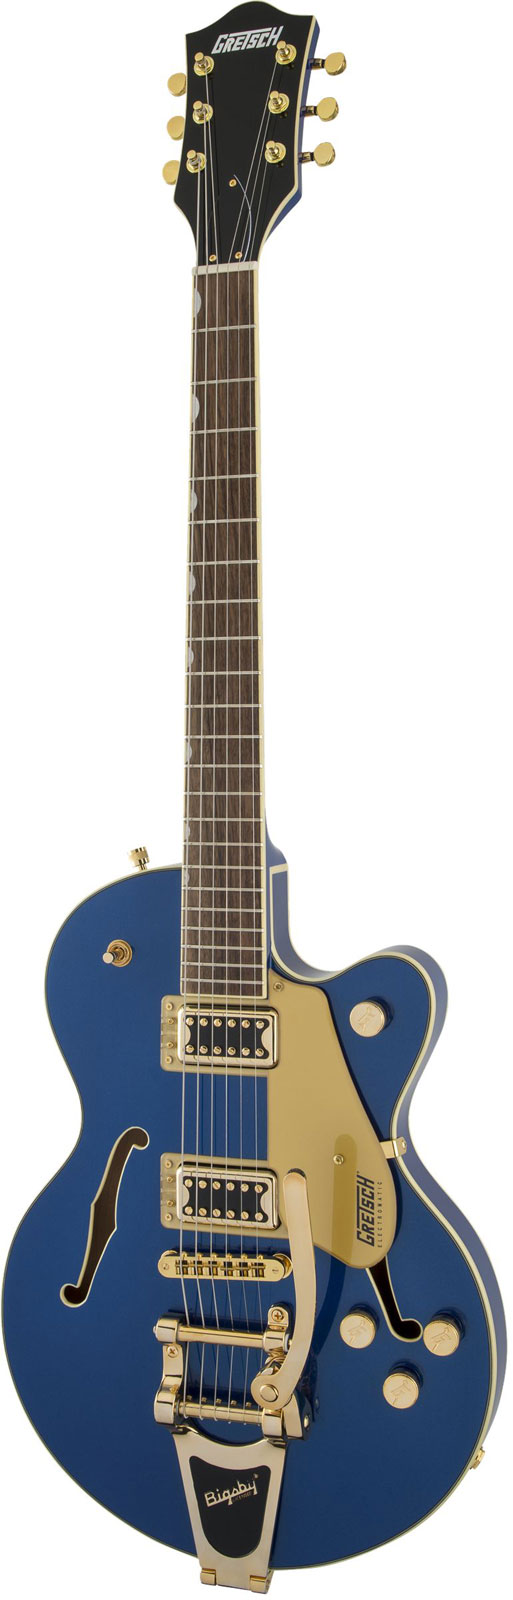 G5655TG ELECTROMATIC CENTER BLOCK JR. SINGLE-CUT WITH BIGSBY AND GOLD HARDWARE LRL, AZURE METALLIC